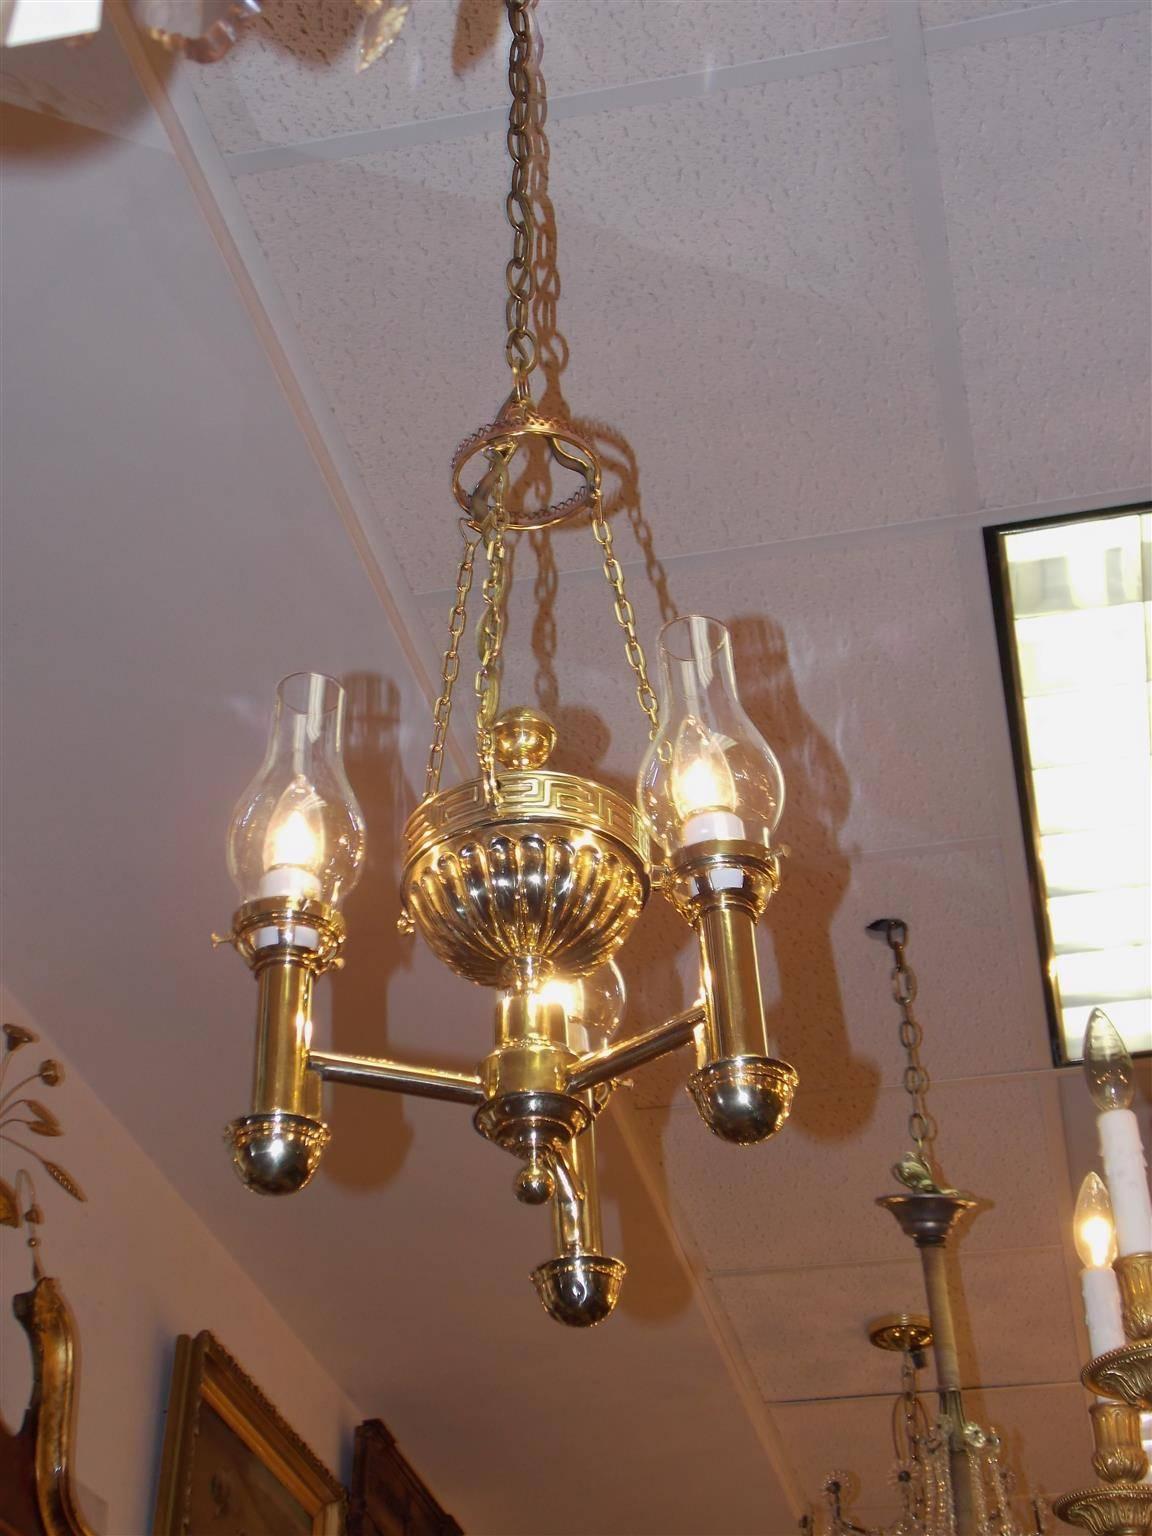 American brass three-arm argand chandelier with ribbed centered urn, Greek key motif, bulbous glass chimneys, original canopy and terminating with a ball finial. Originally oil and has been electrified. Early 19th century.